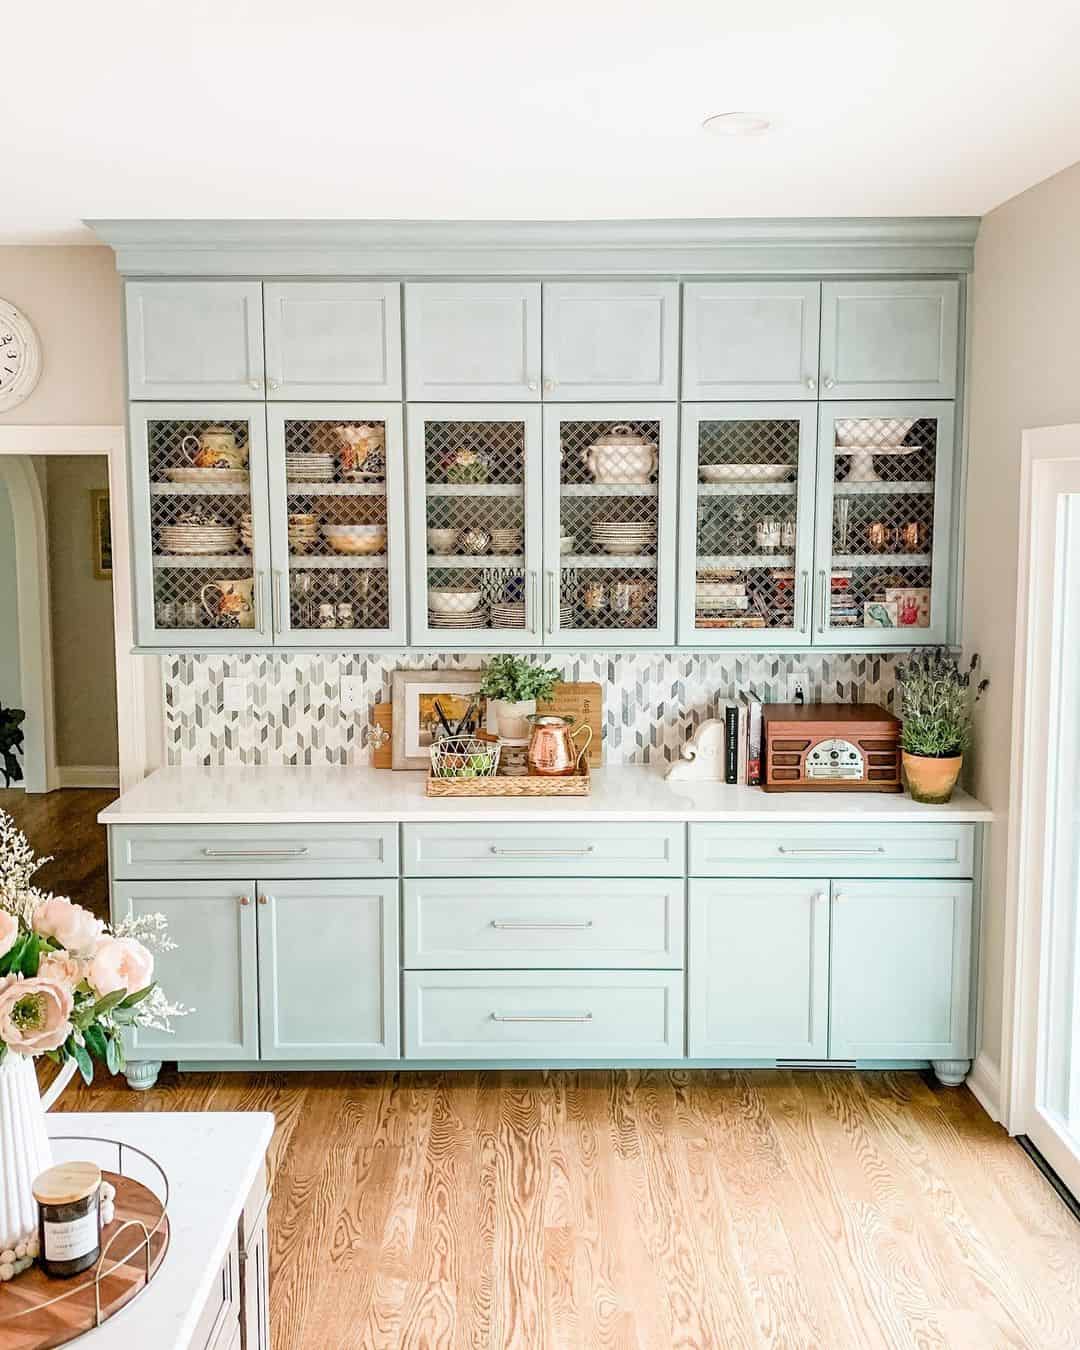 Designing a farmhouse kitchen: 13 ideas that are brimming with